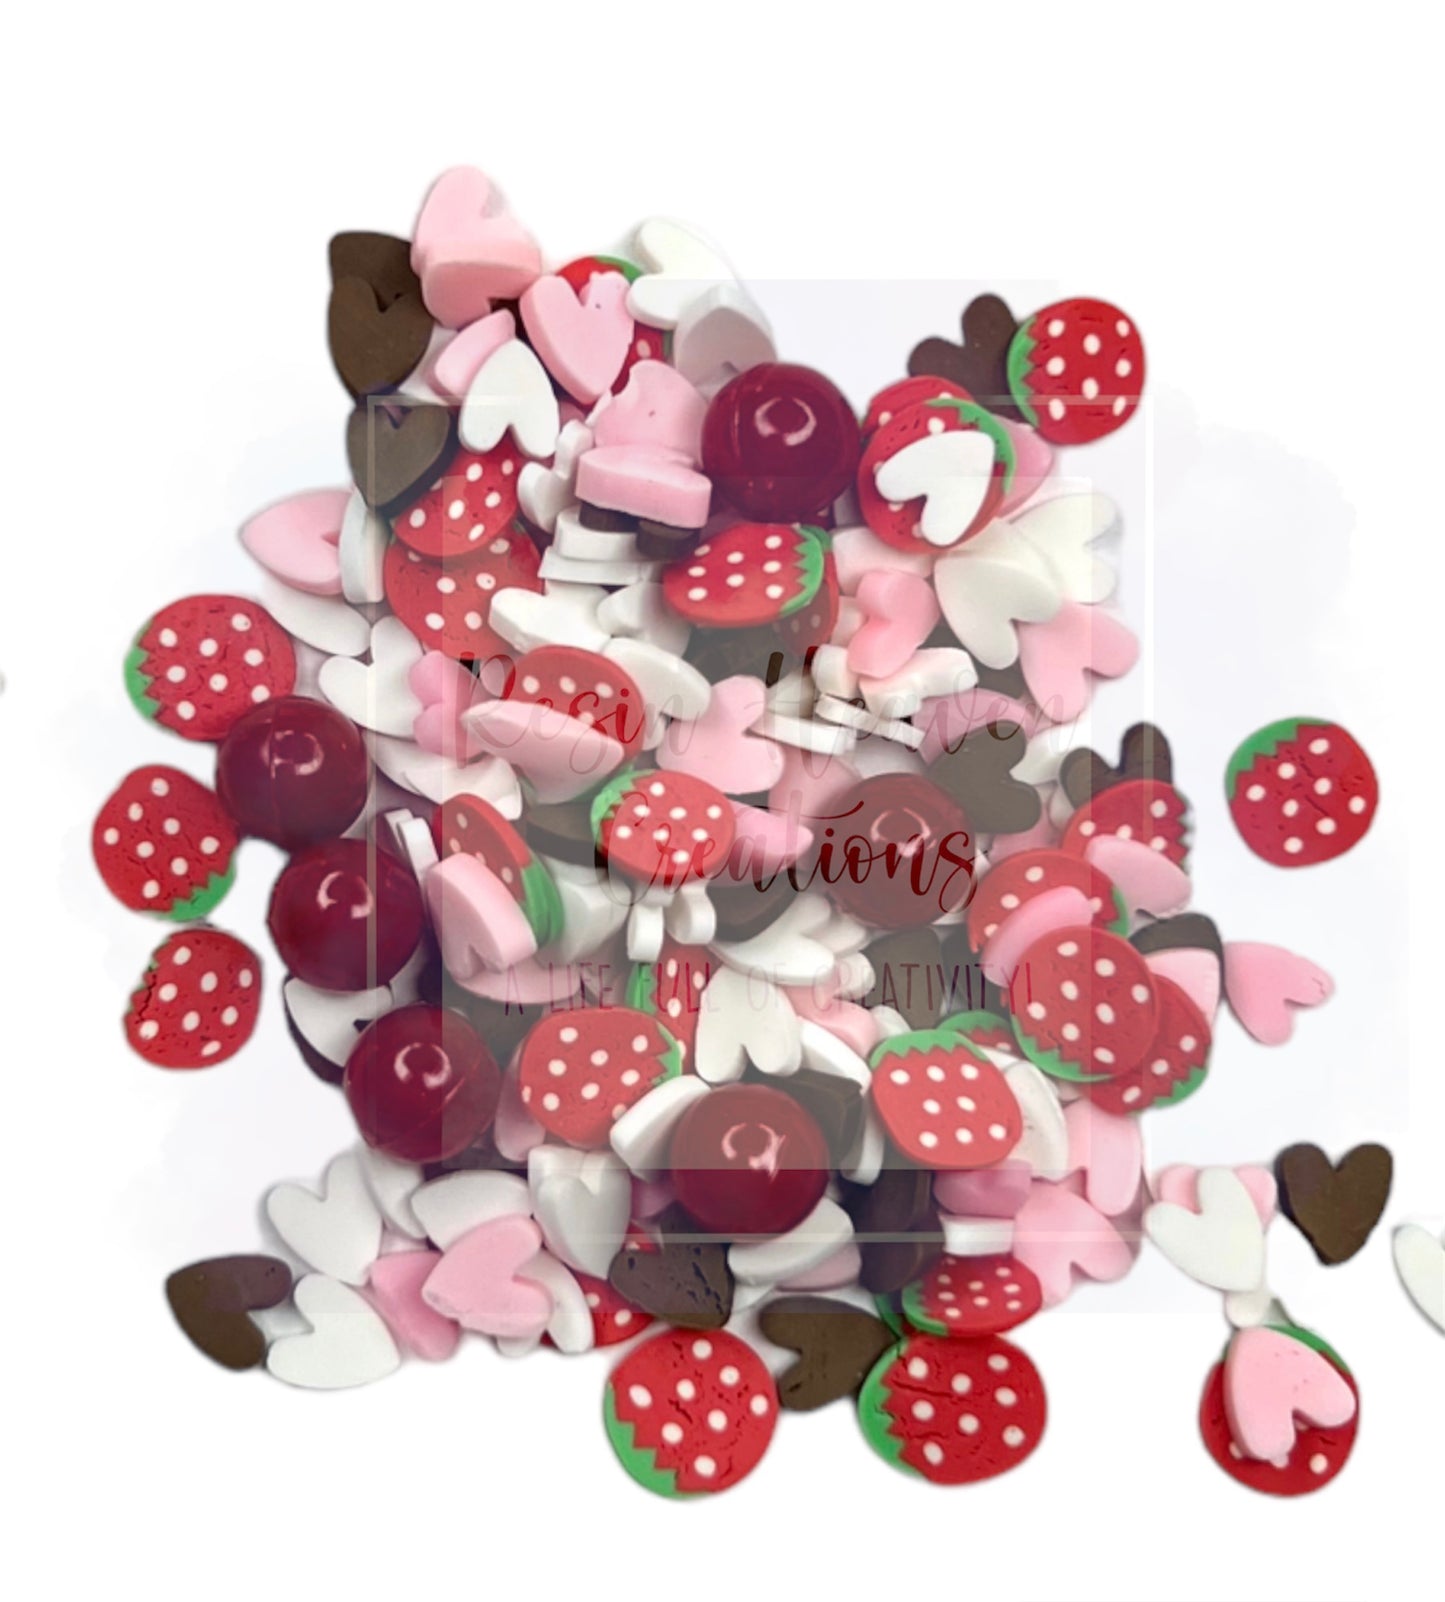 Strawberry and Chocolate Clay Pieces